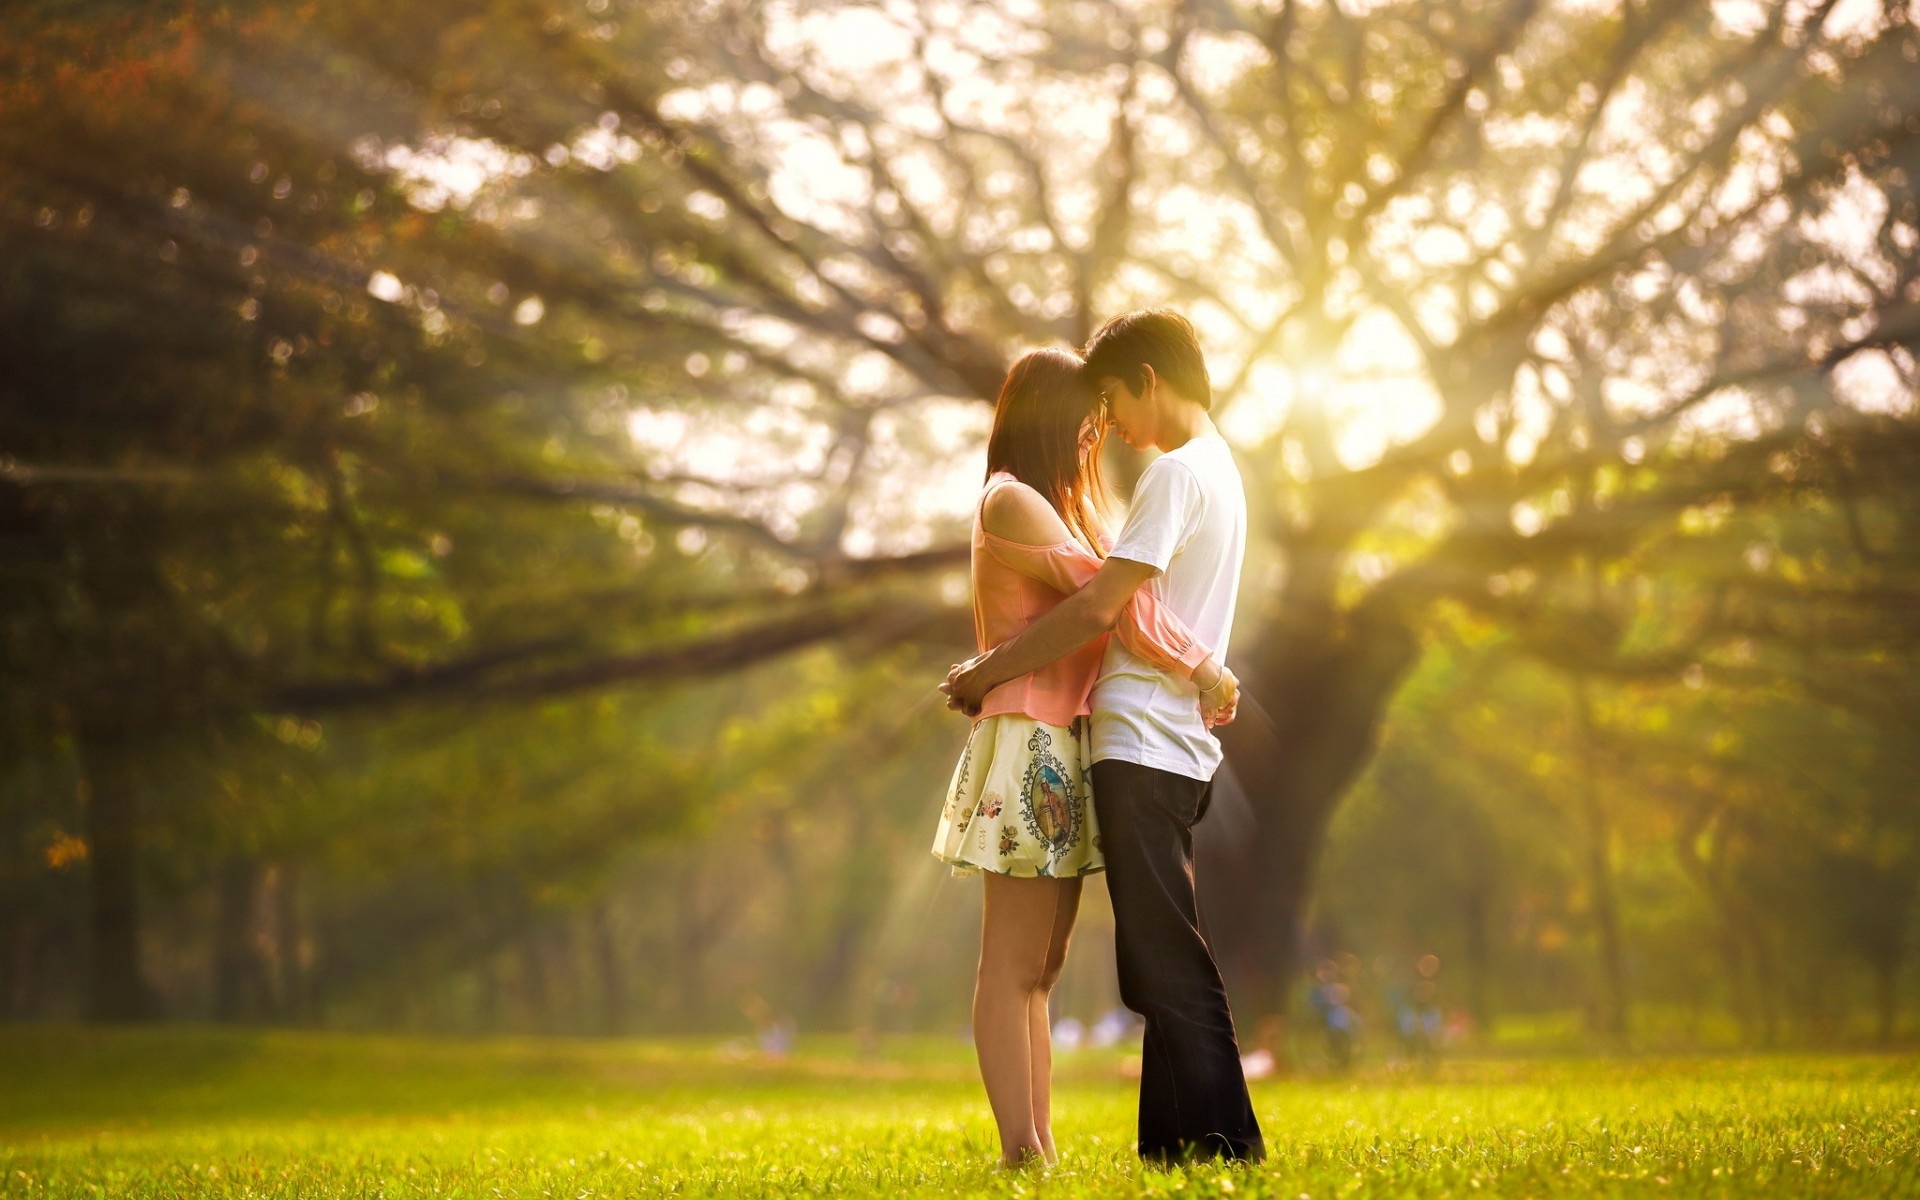 hug wallpaper download,people in nature,romance,photograph,nature,love